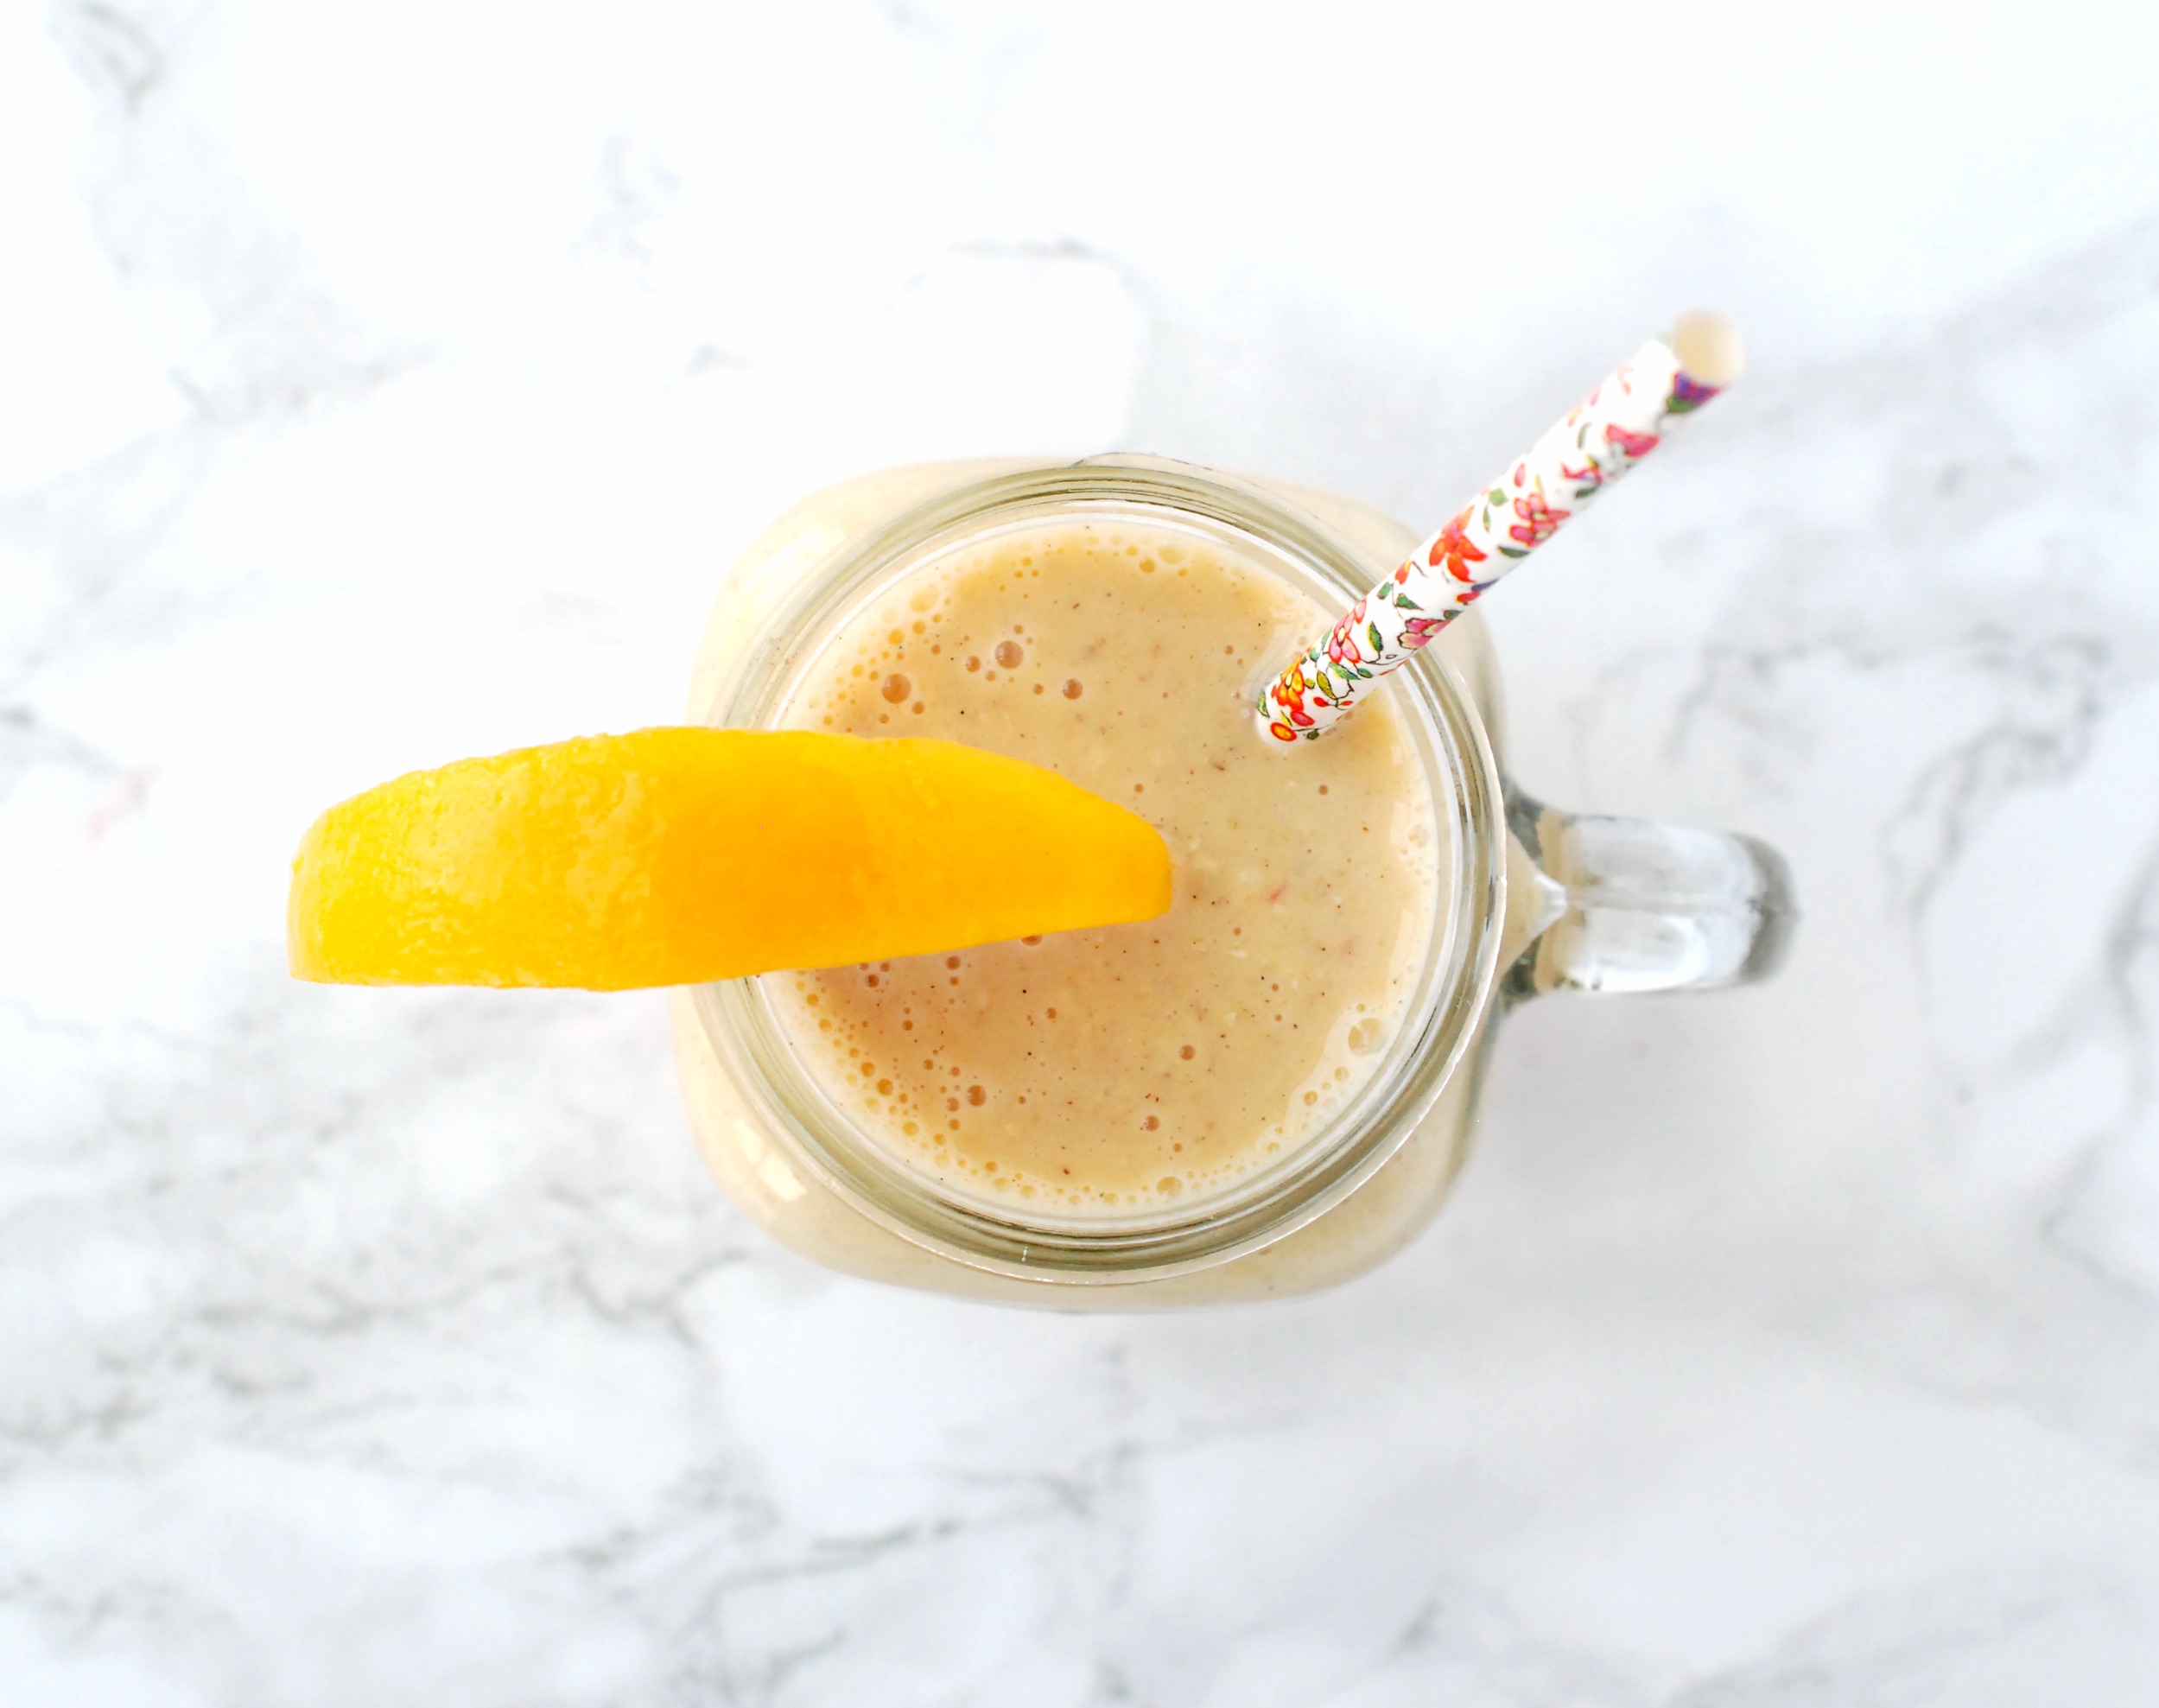 A rich, creamy and delicious smoothie that tastes just like peach cobbler. Perfect for a snack, dessert or breakfast on the go!